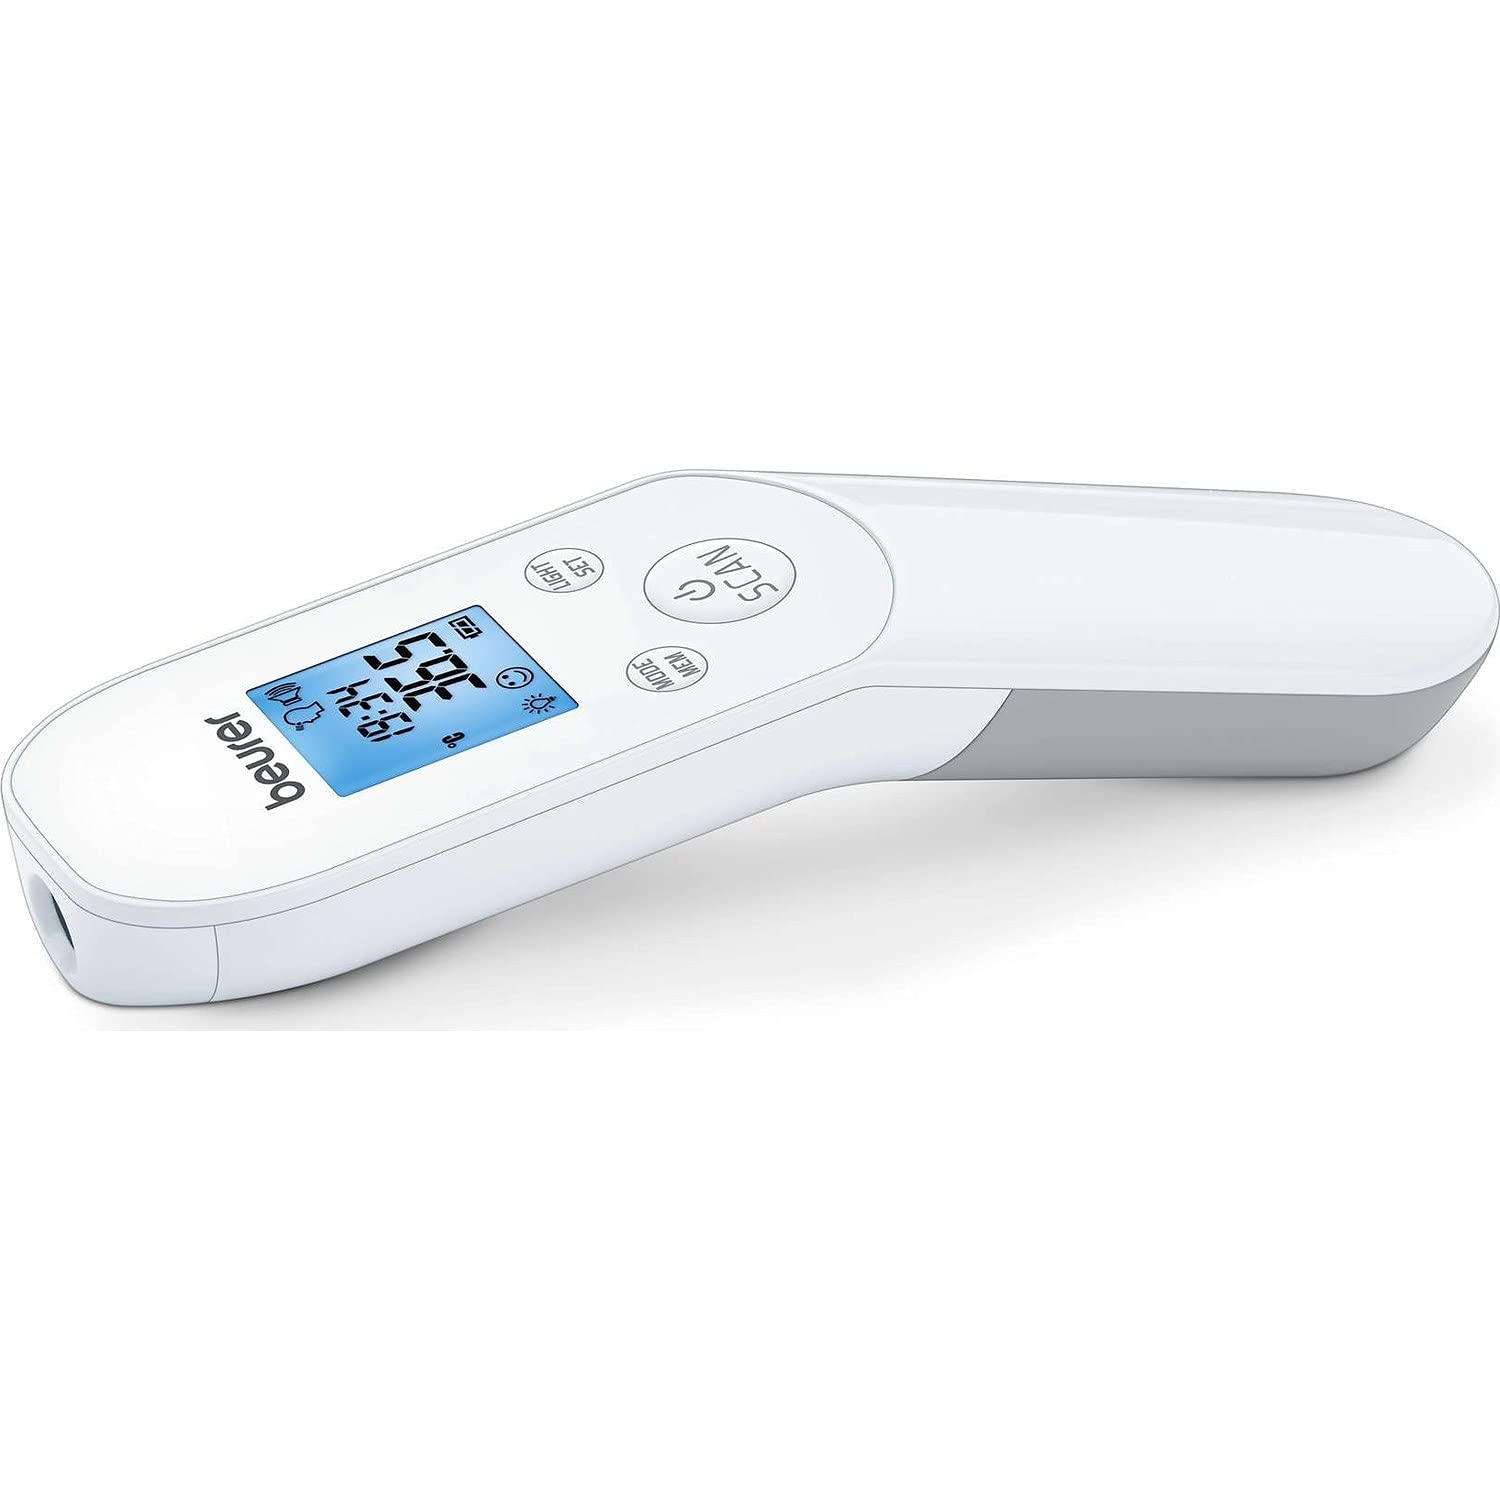 Beurer FT85 Non Contact Clinical Thermometer (White)